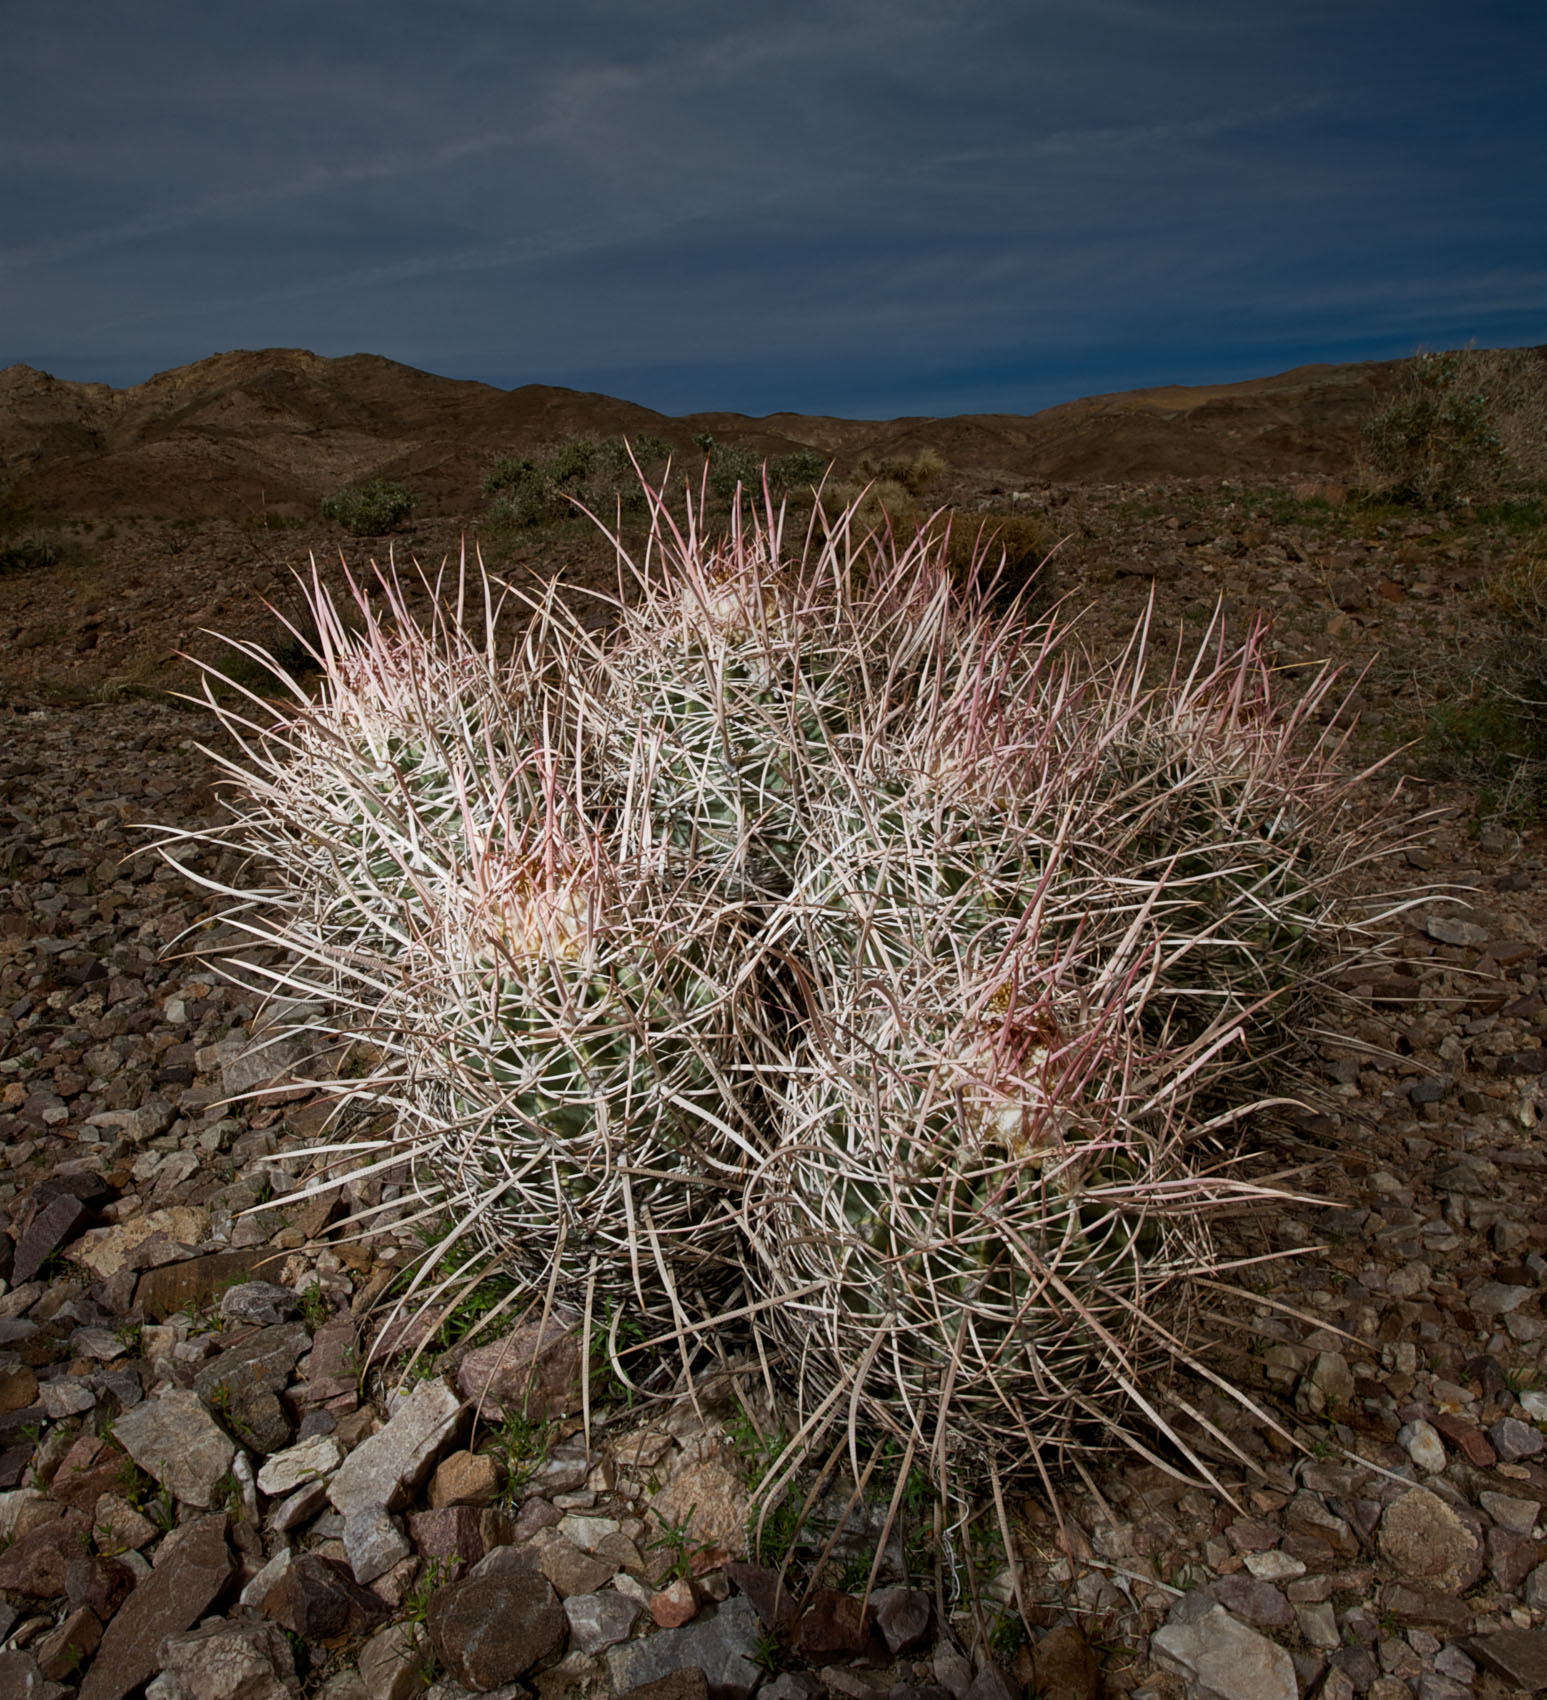 Flash lit cactus in Death Valley National Park.